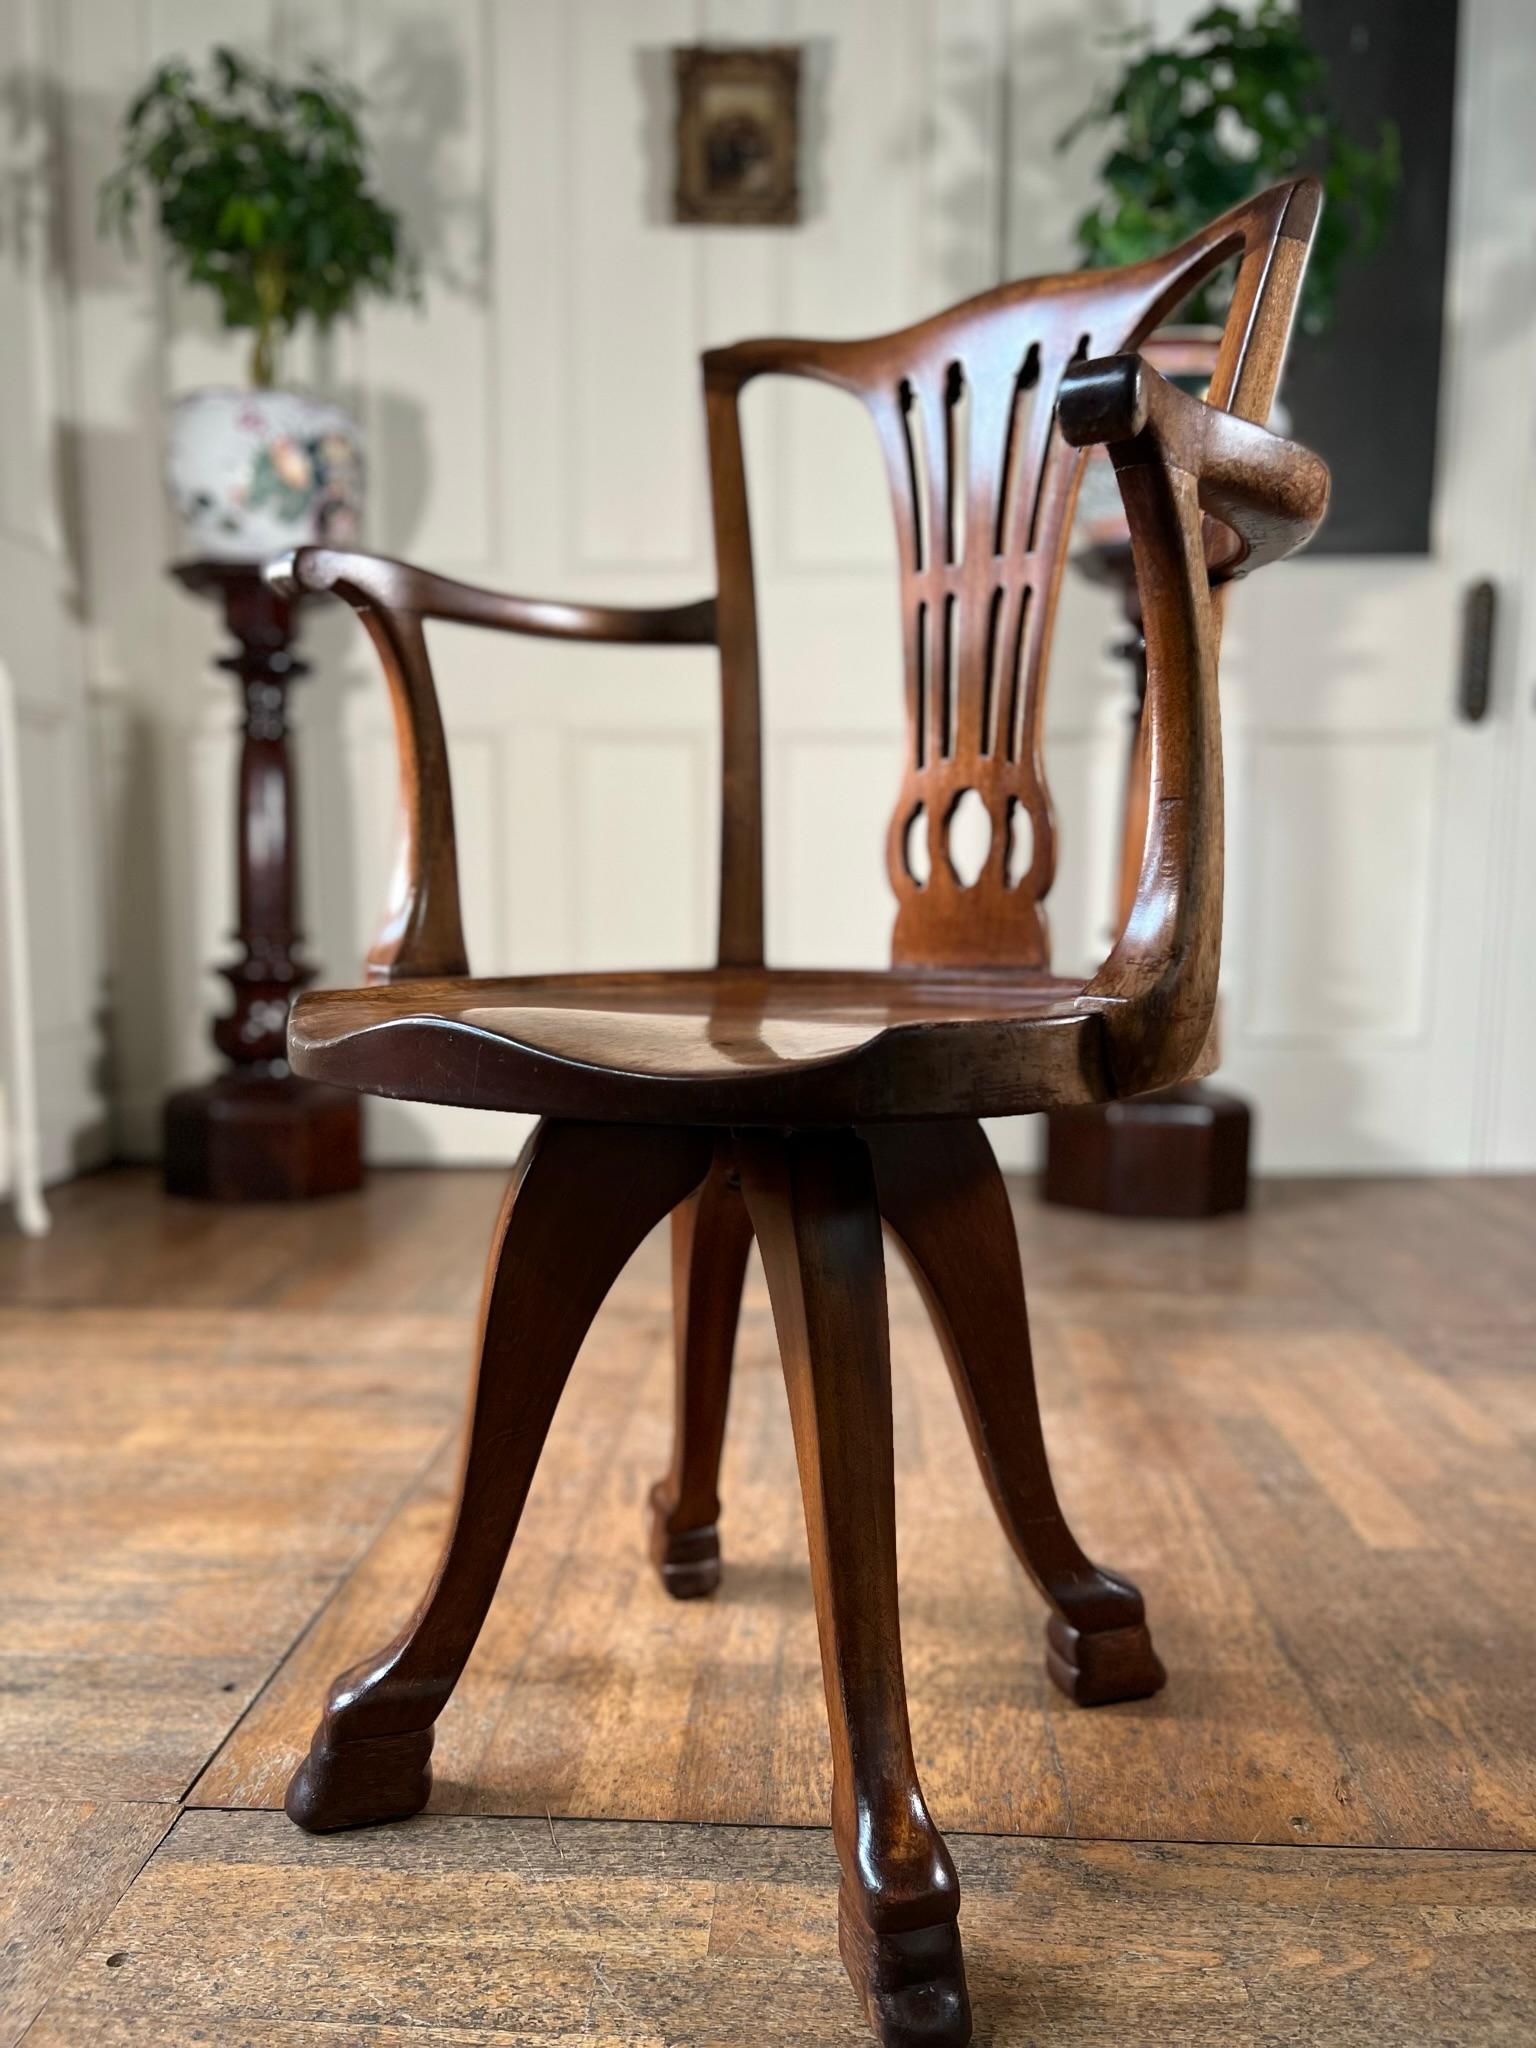 Superb quality, walnut desk chair by the acclaimed furniture makers Howard & Sons.

A rare model with pierced splat and swivel base probably dating to the turn of the 20th century.

Good functional condition with signs of use exactly how it